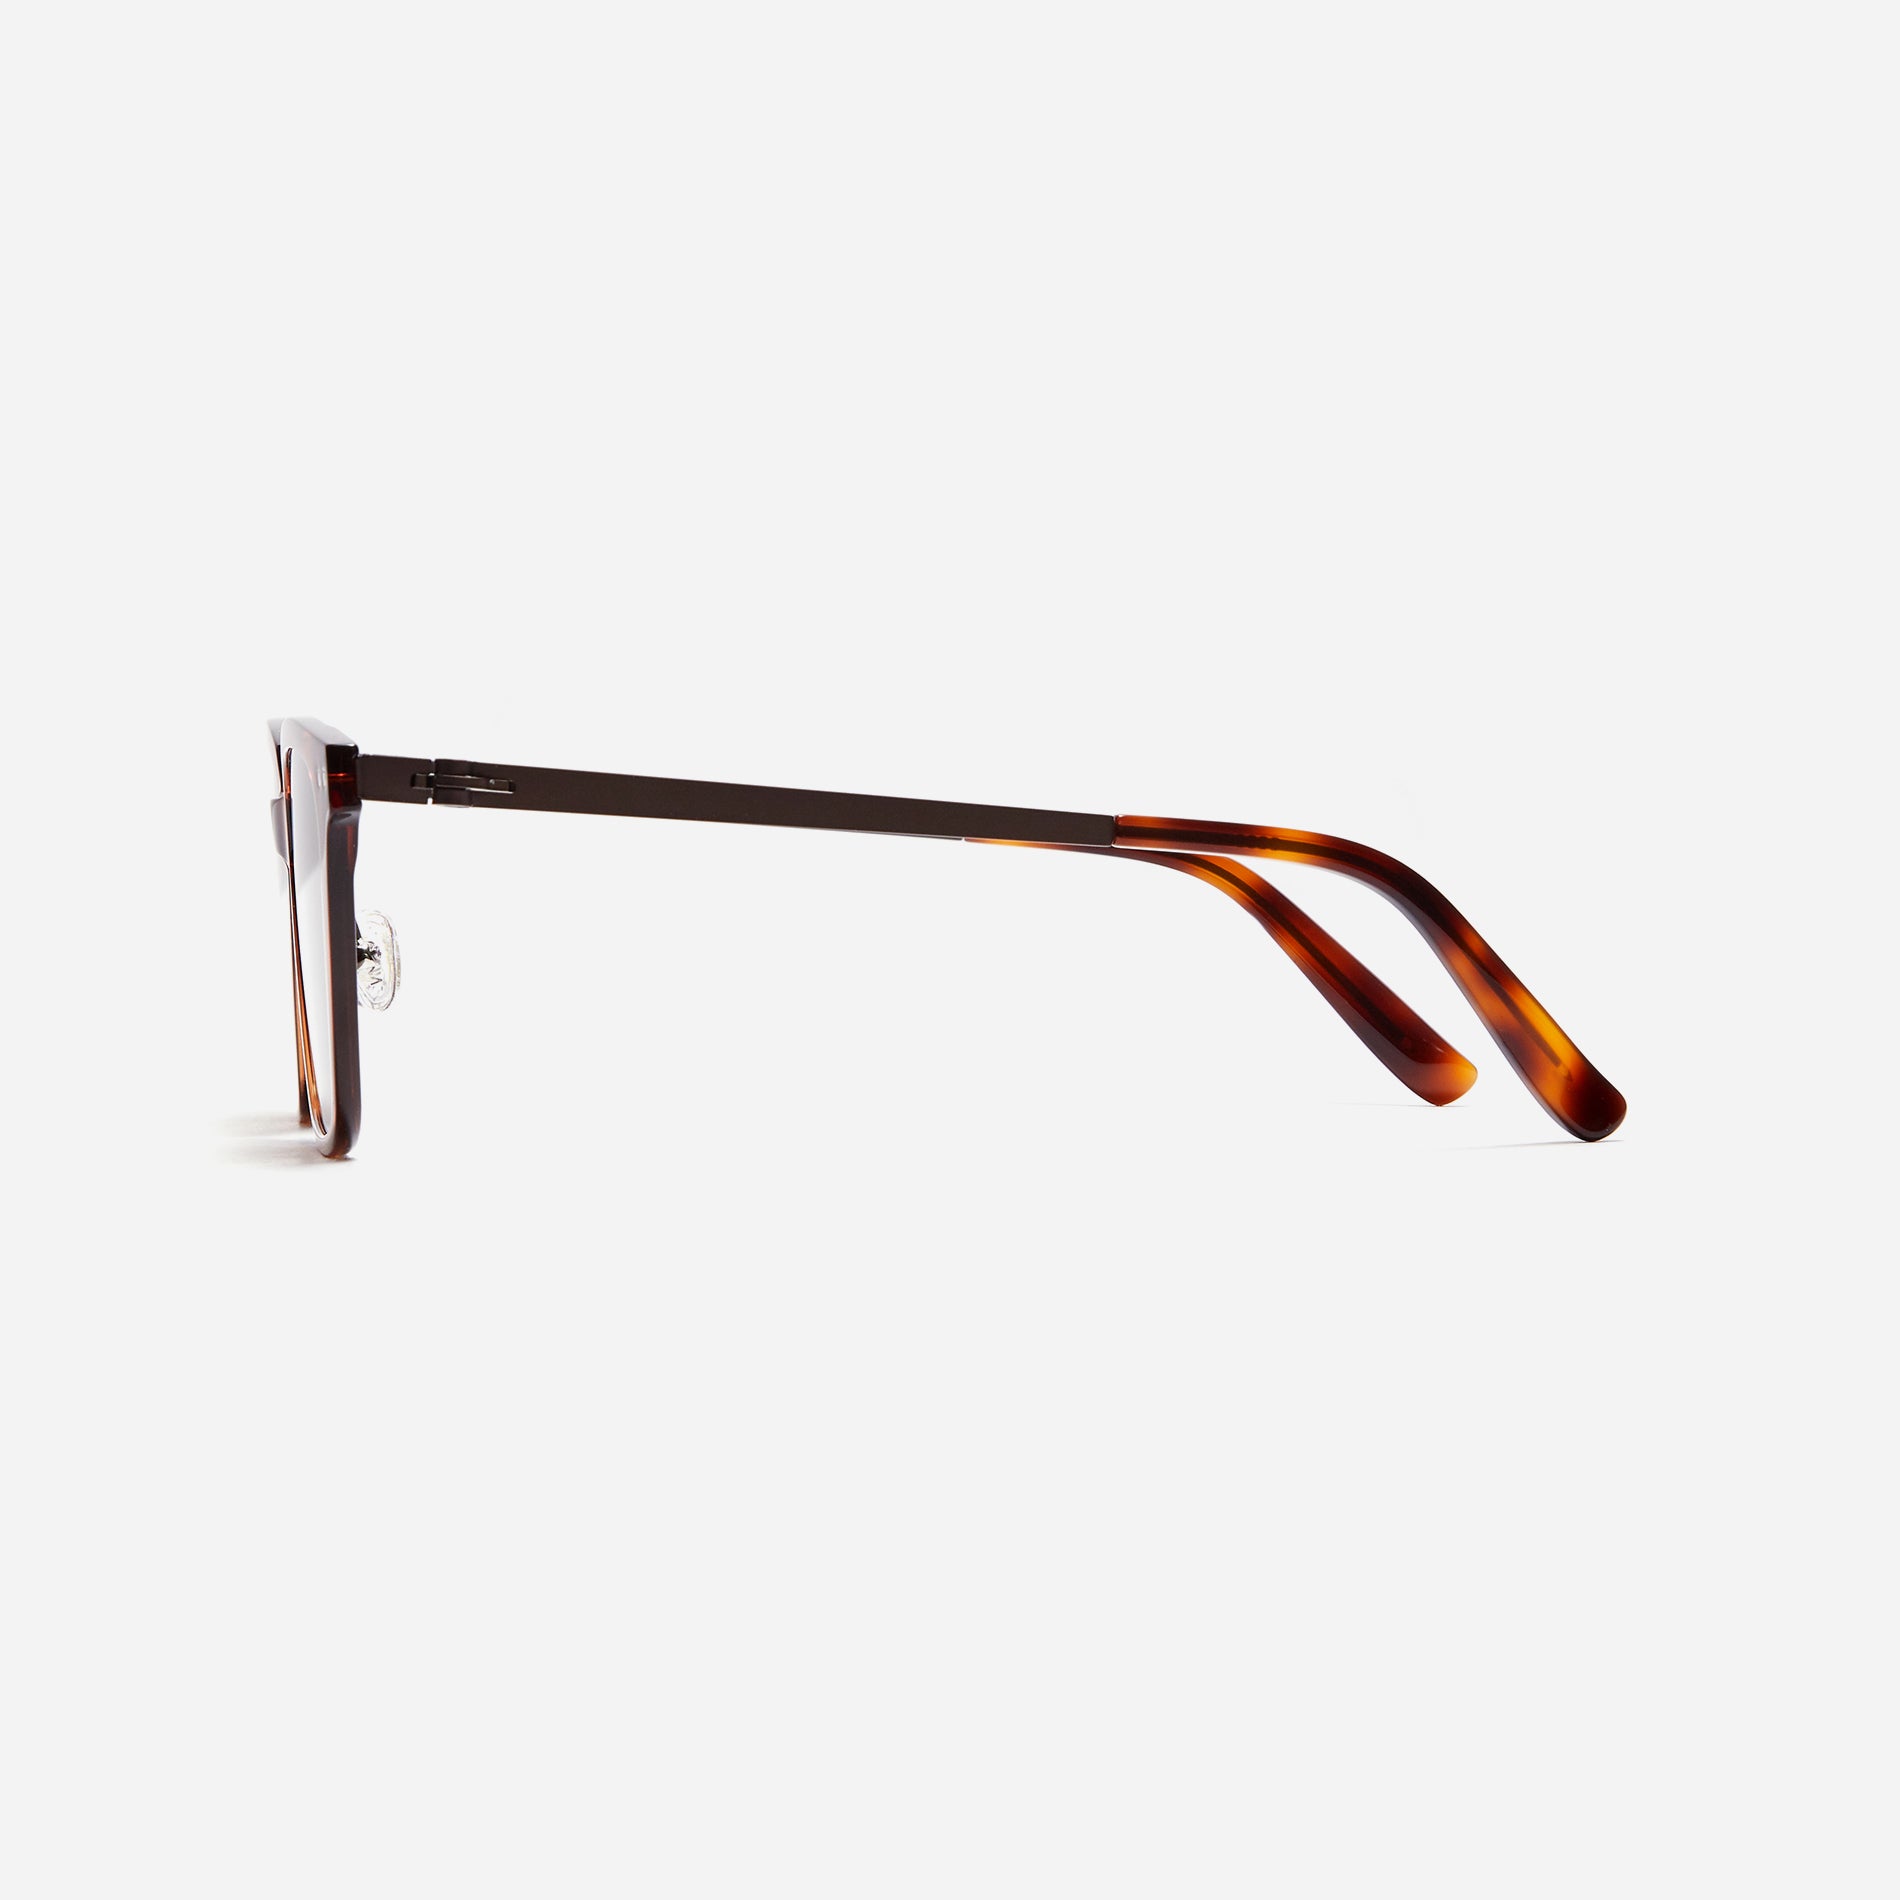 Square-shaped polarized sunglasses, representing CARIN’s POLARIZED line. Crafted from lightweight and durable bio-plastic to prevent slipping.